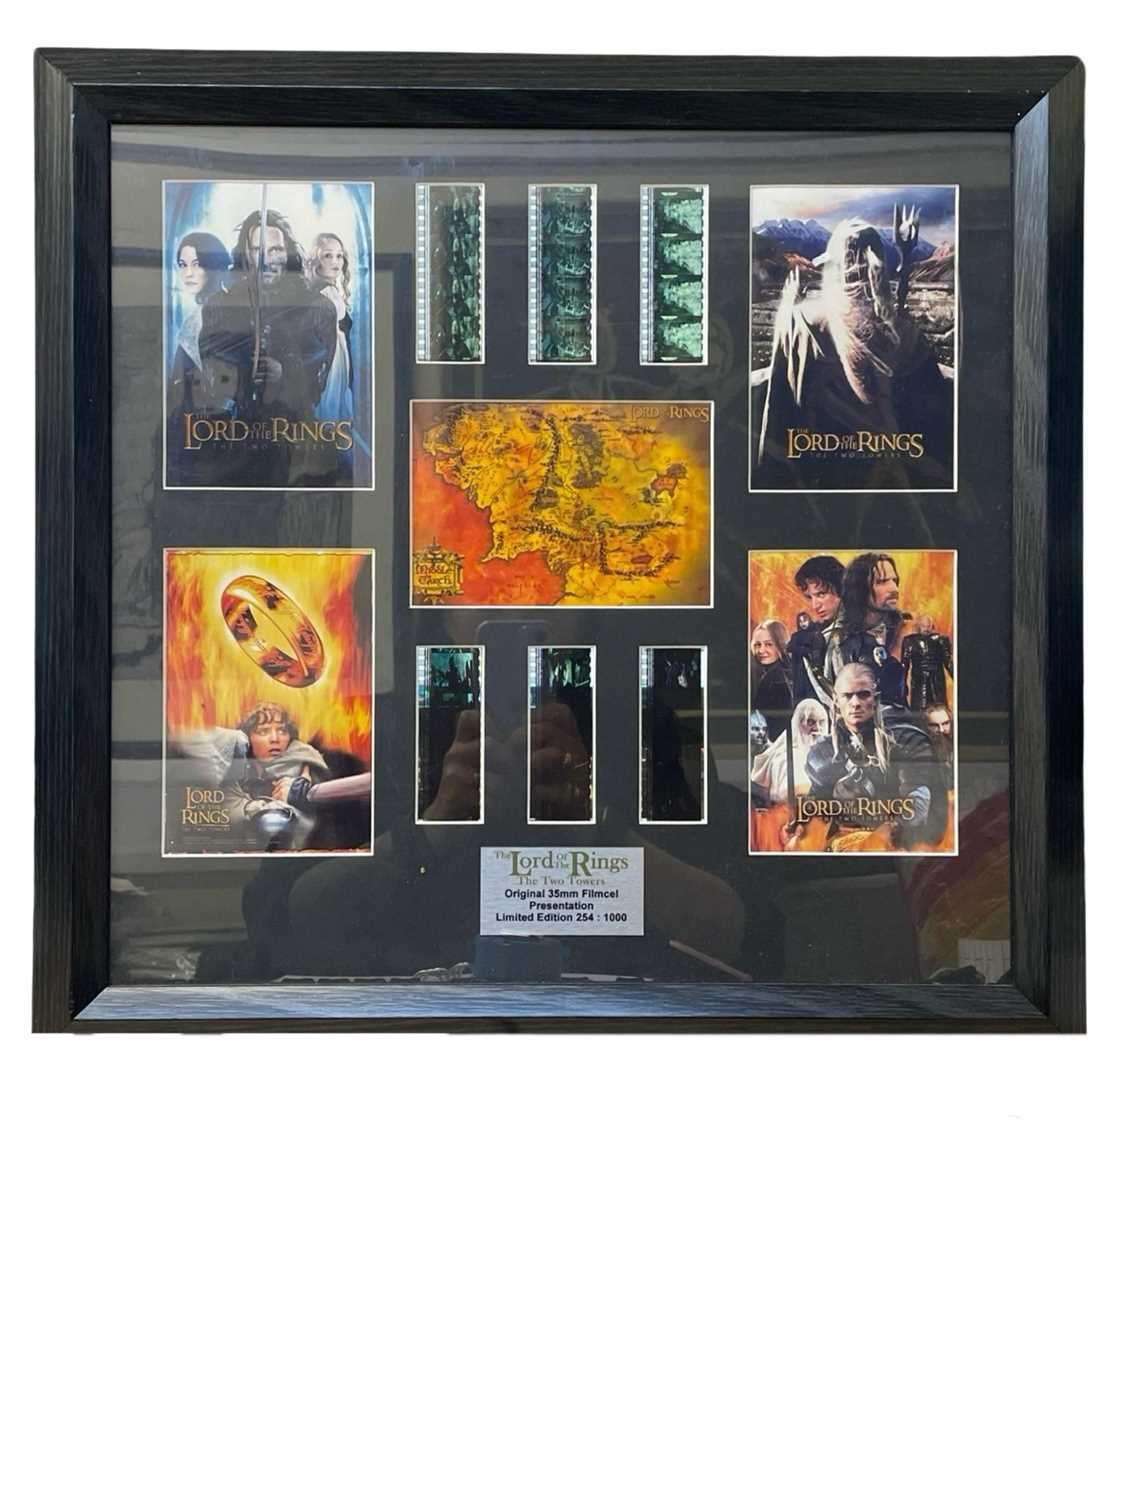 A limited edition framed presentation display for the The Lord of the Rings: The Two Towers,